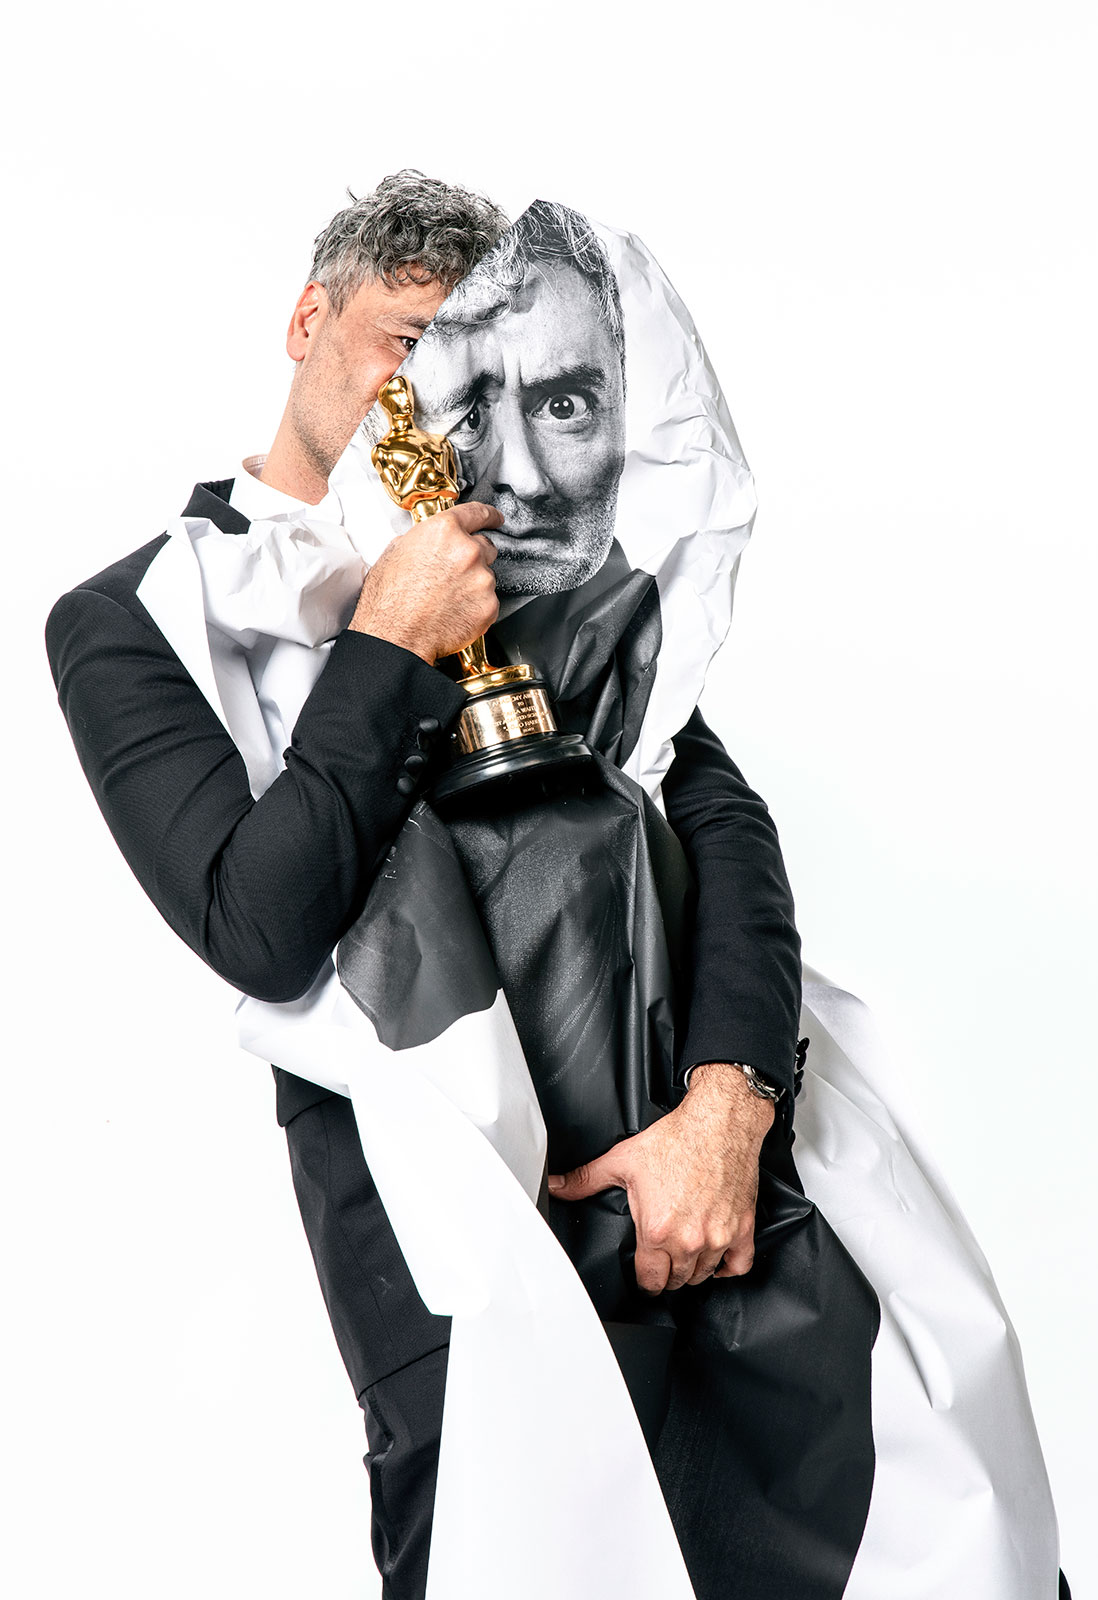 Taika Waititi poses with his Oscar for Best Adapted Screenplay. (Photograph by JR for TIME)